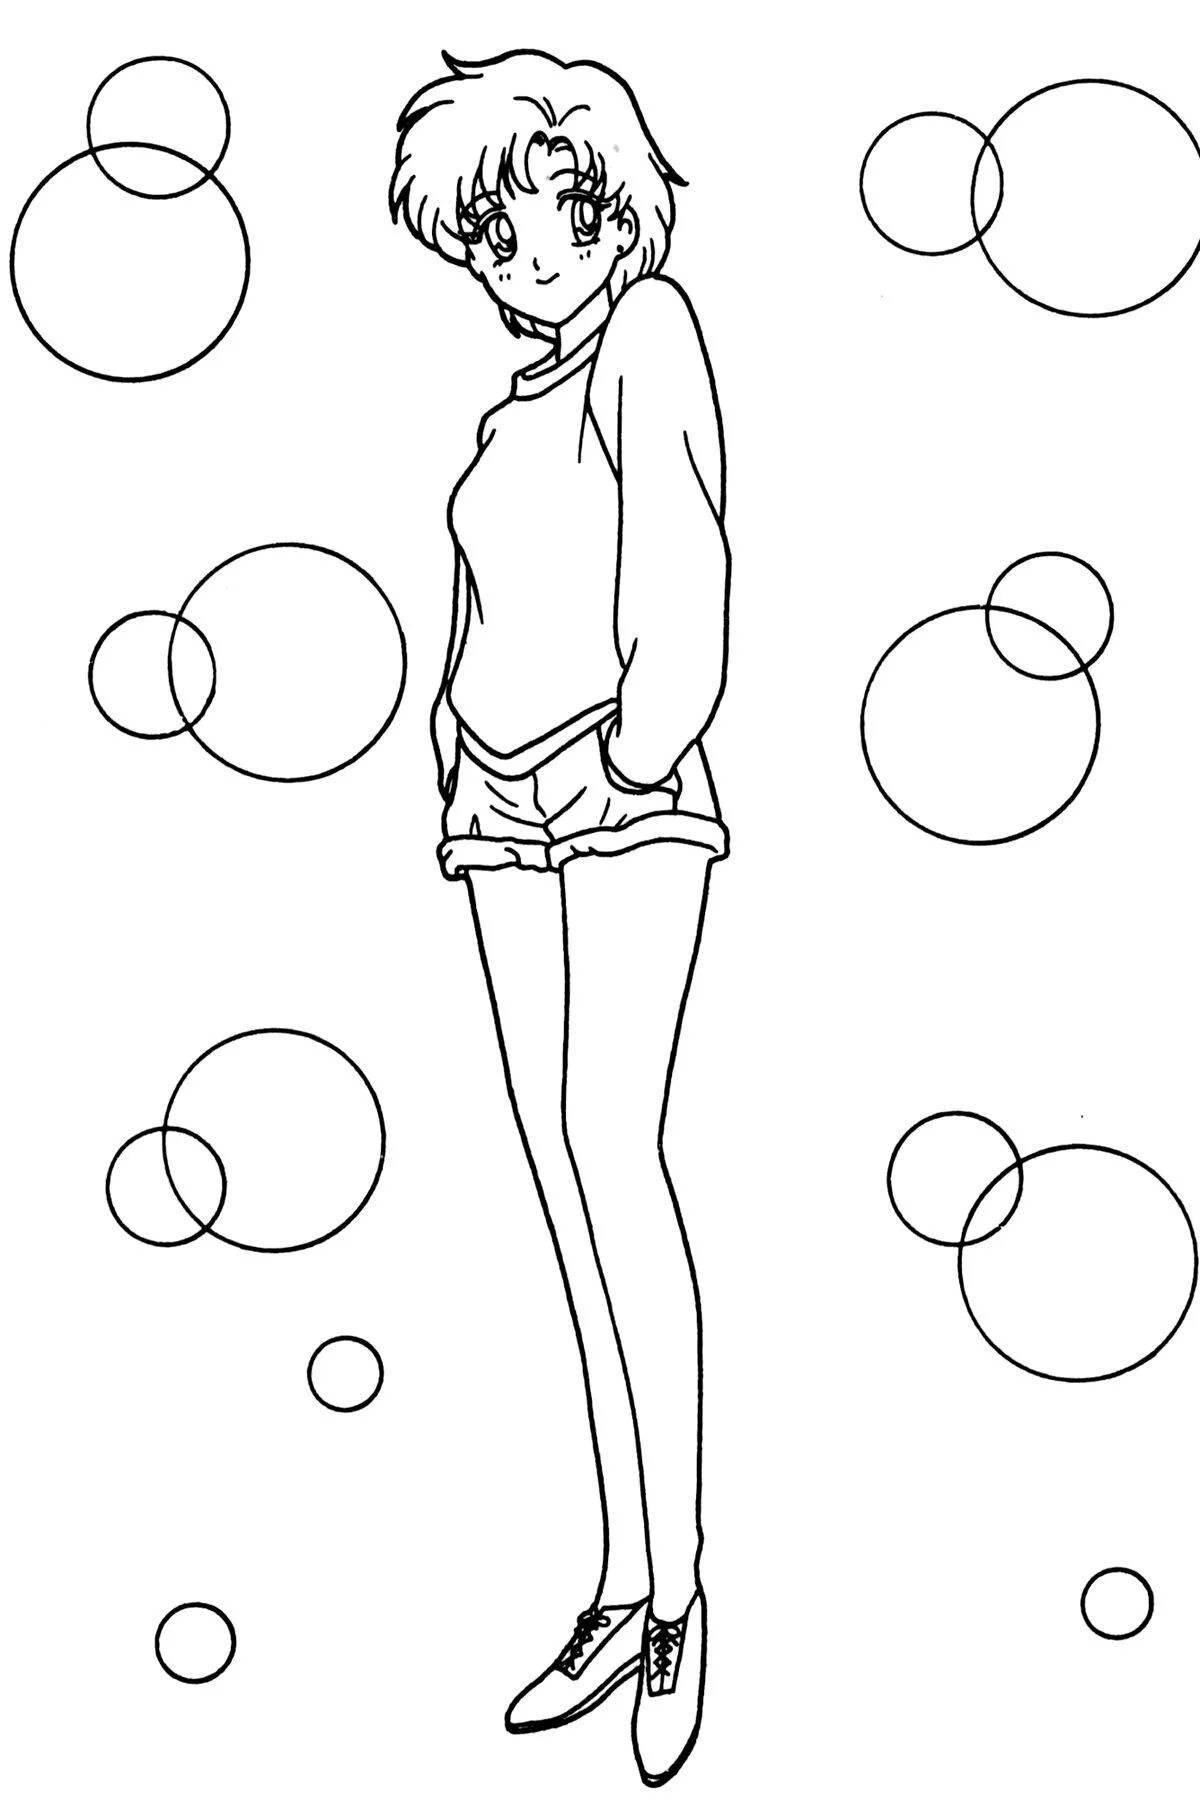 Exuberant coloring page full length anime boy